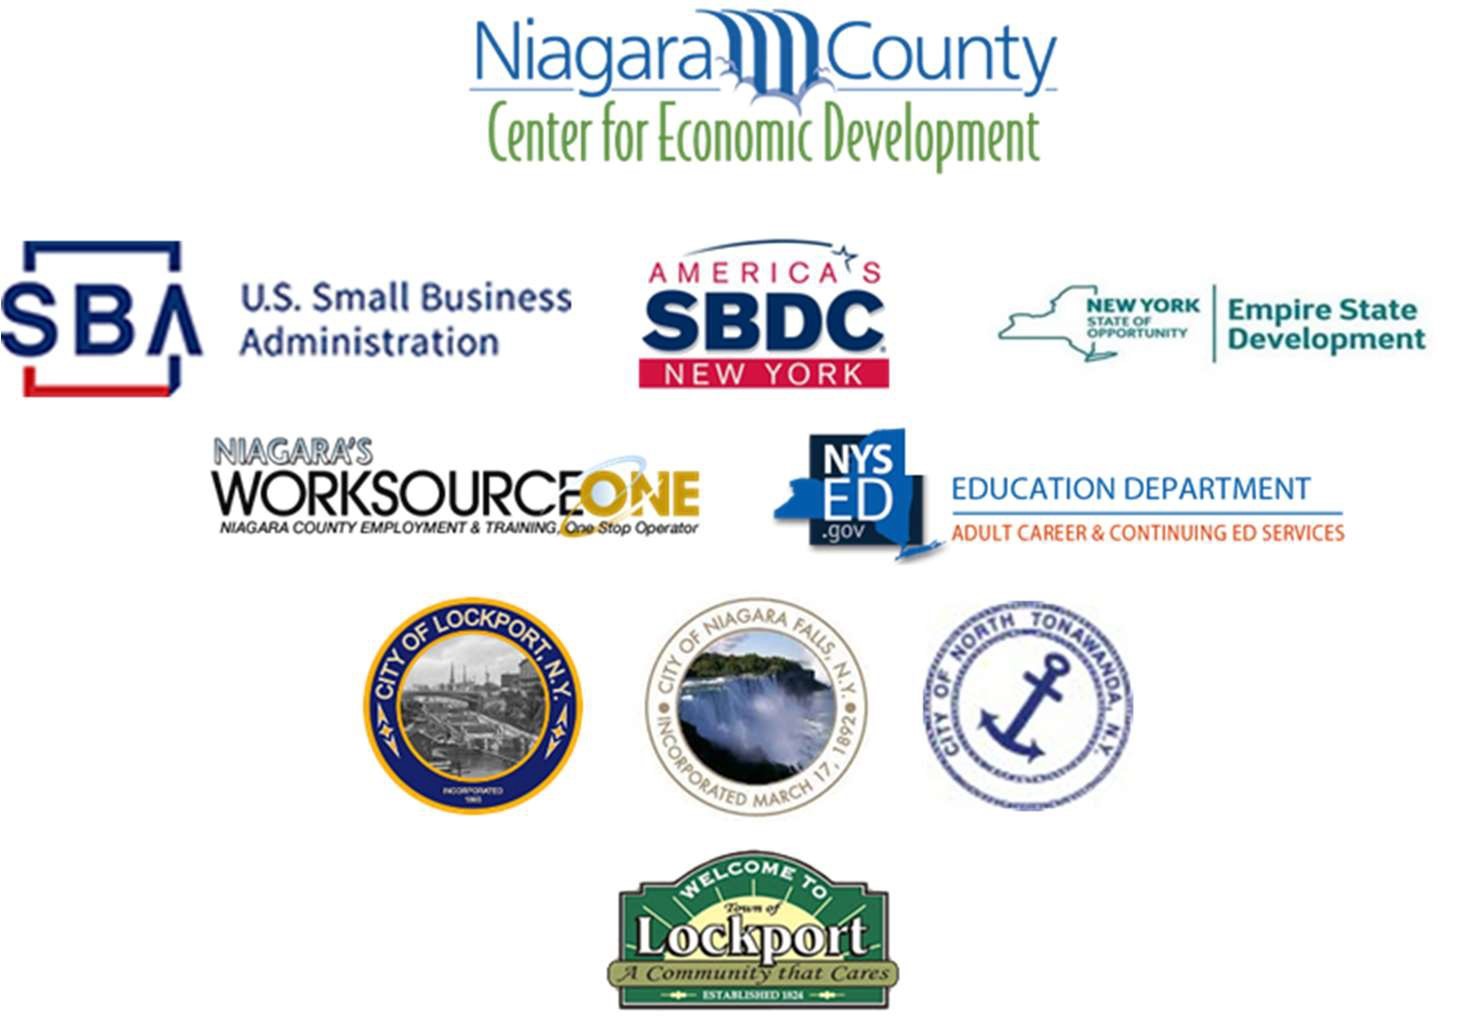 Niagara County Hosting A Virtual Business Workshop For All Interested Businesses